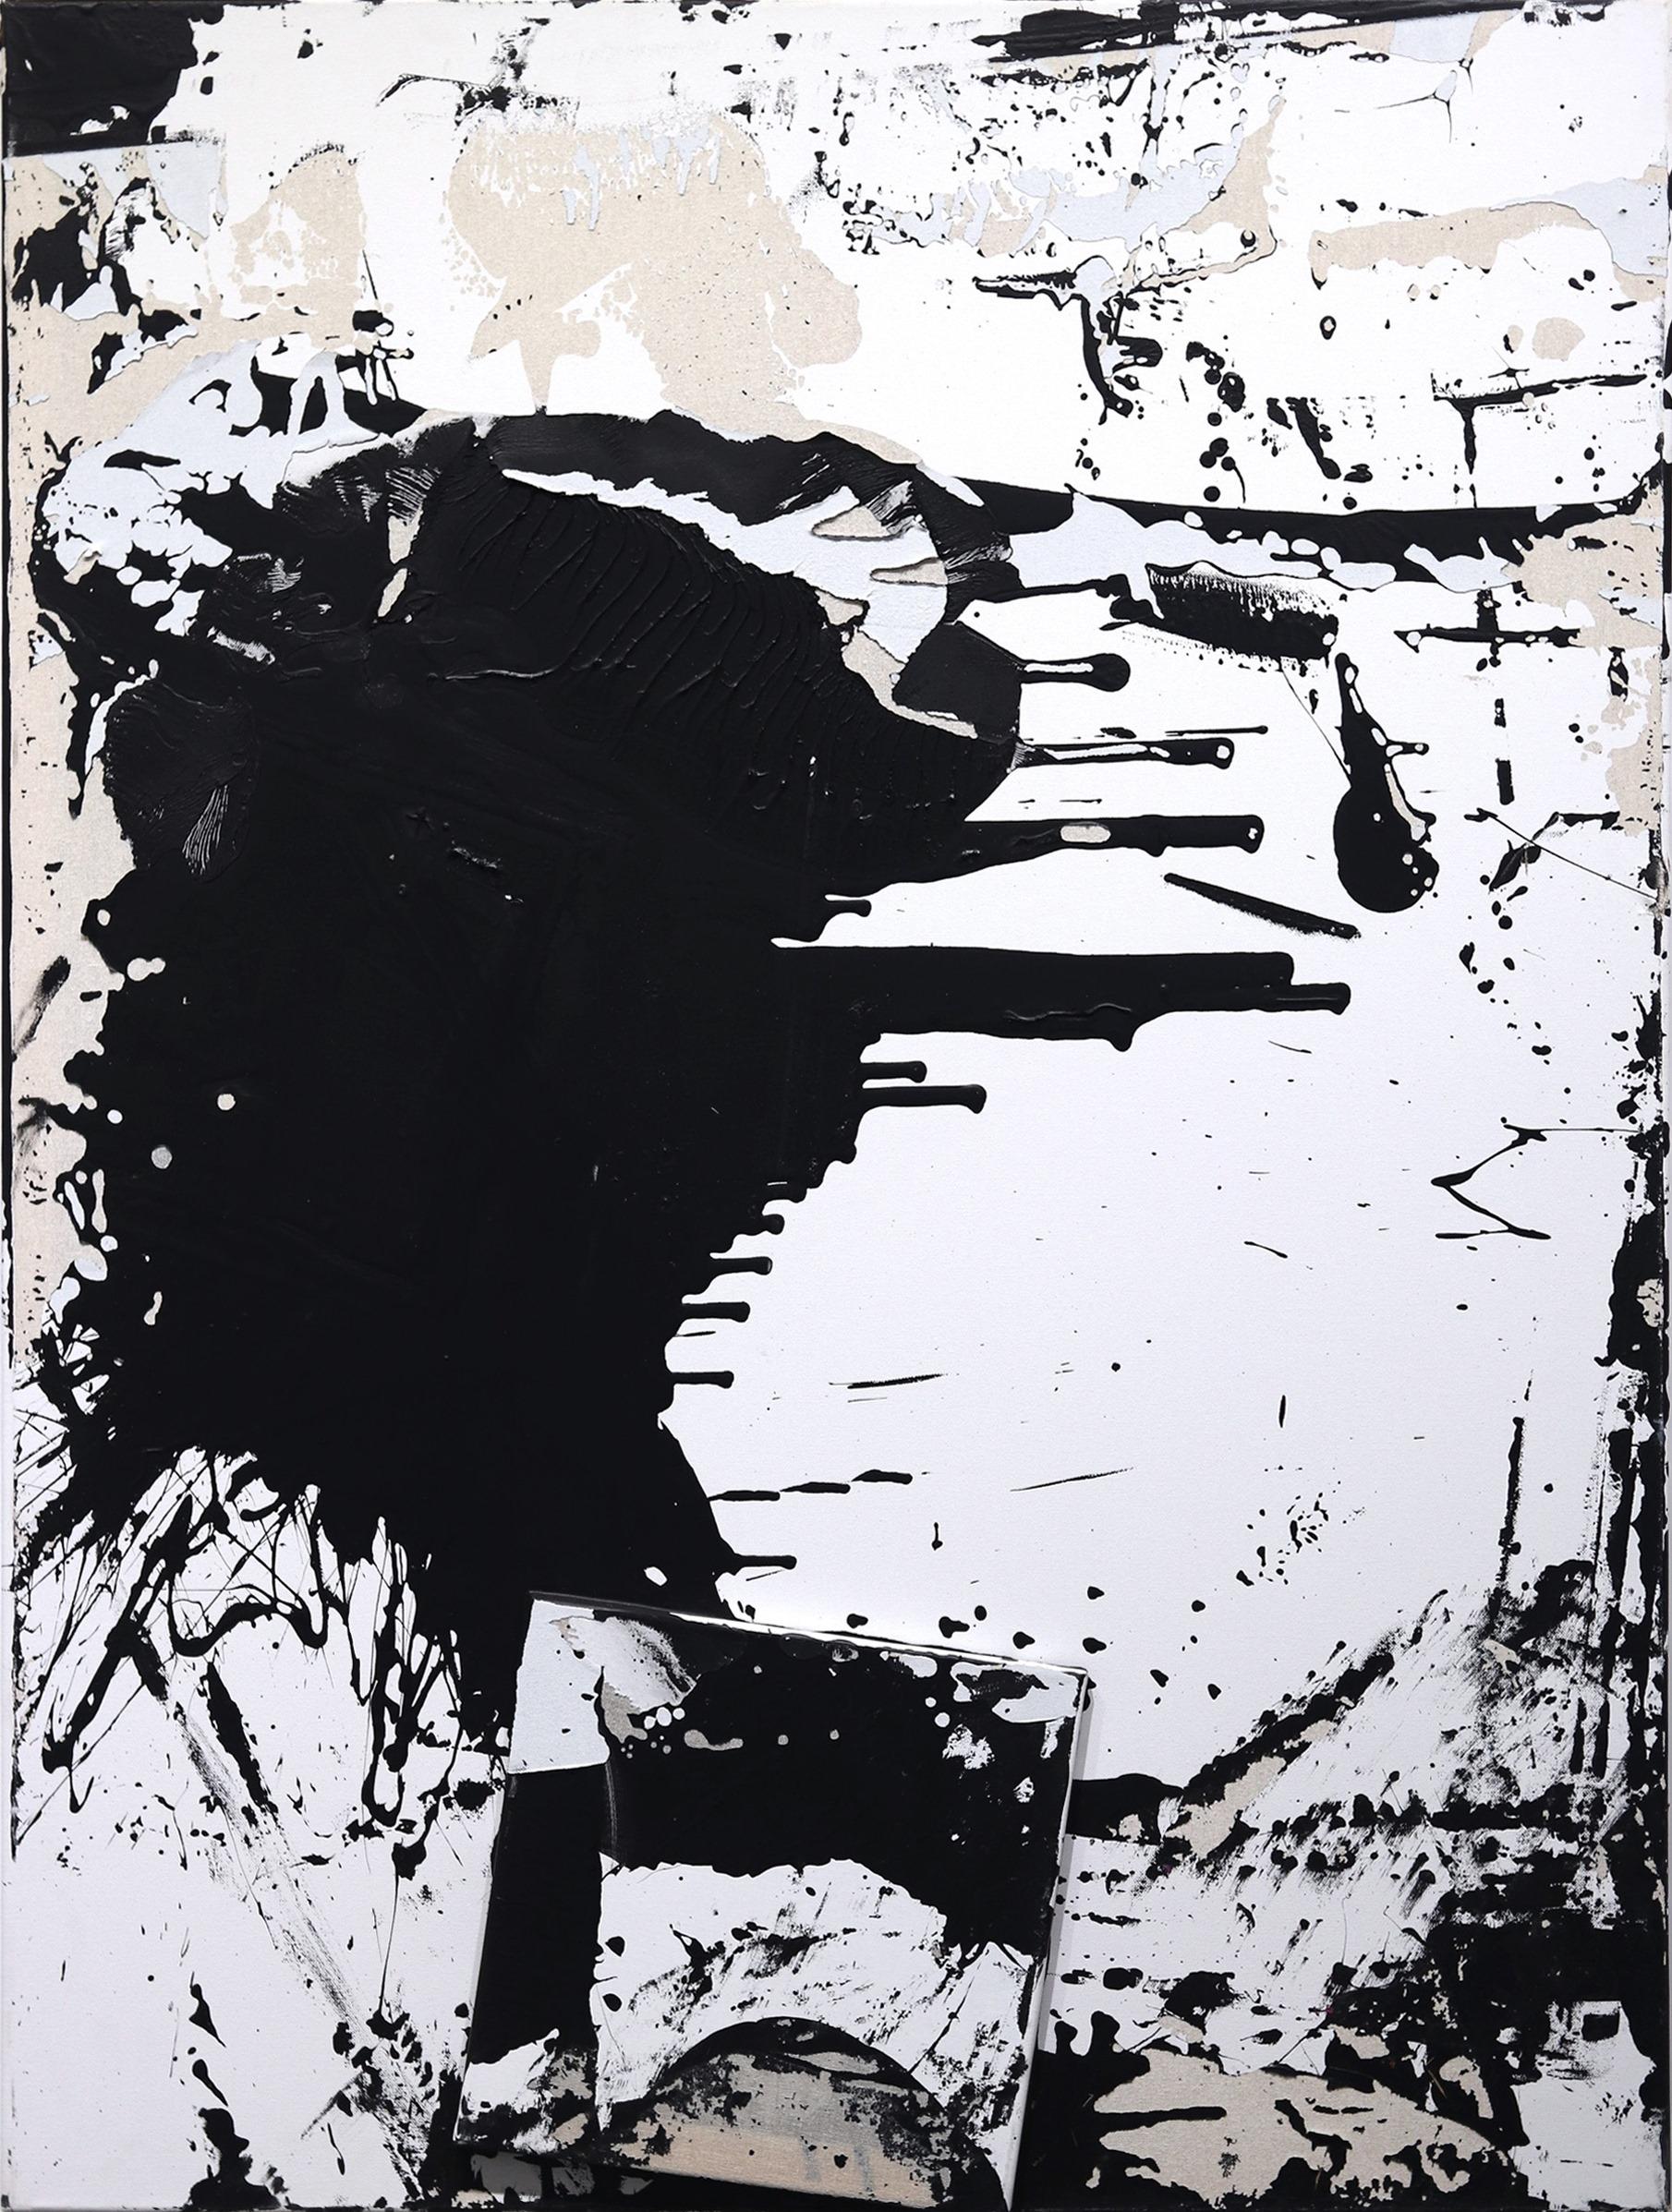 Cole Altuzarra Abstract Painting - 0010 - Original Black and White Abstract Artwork